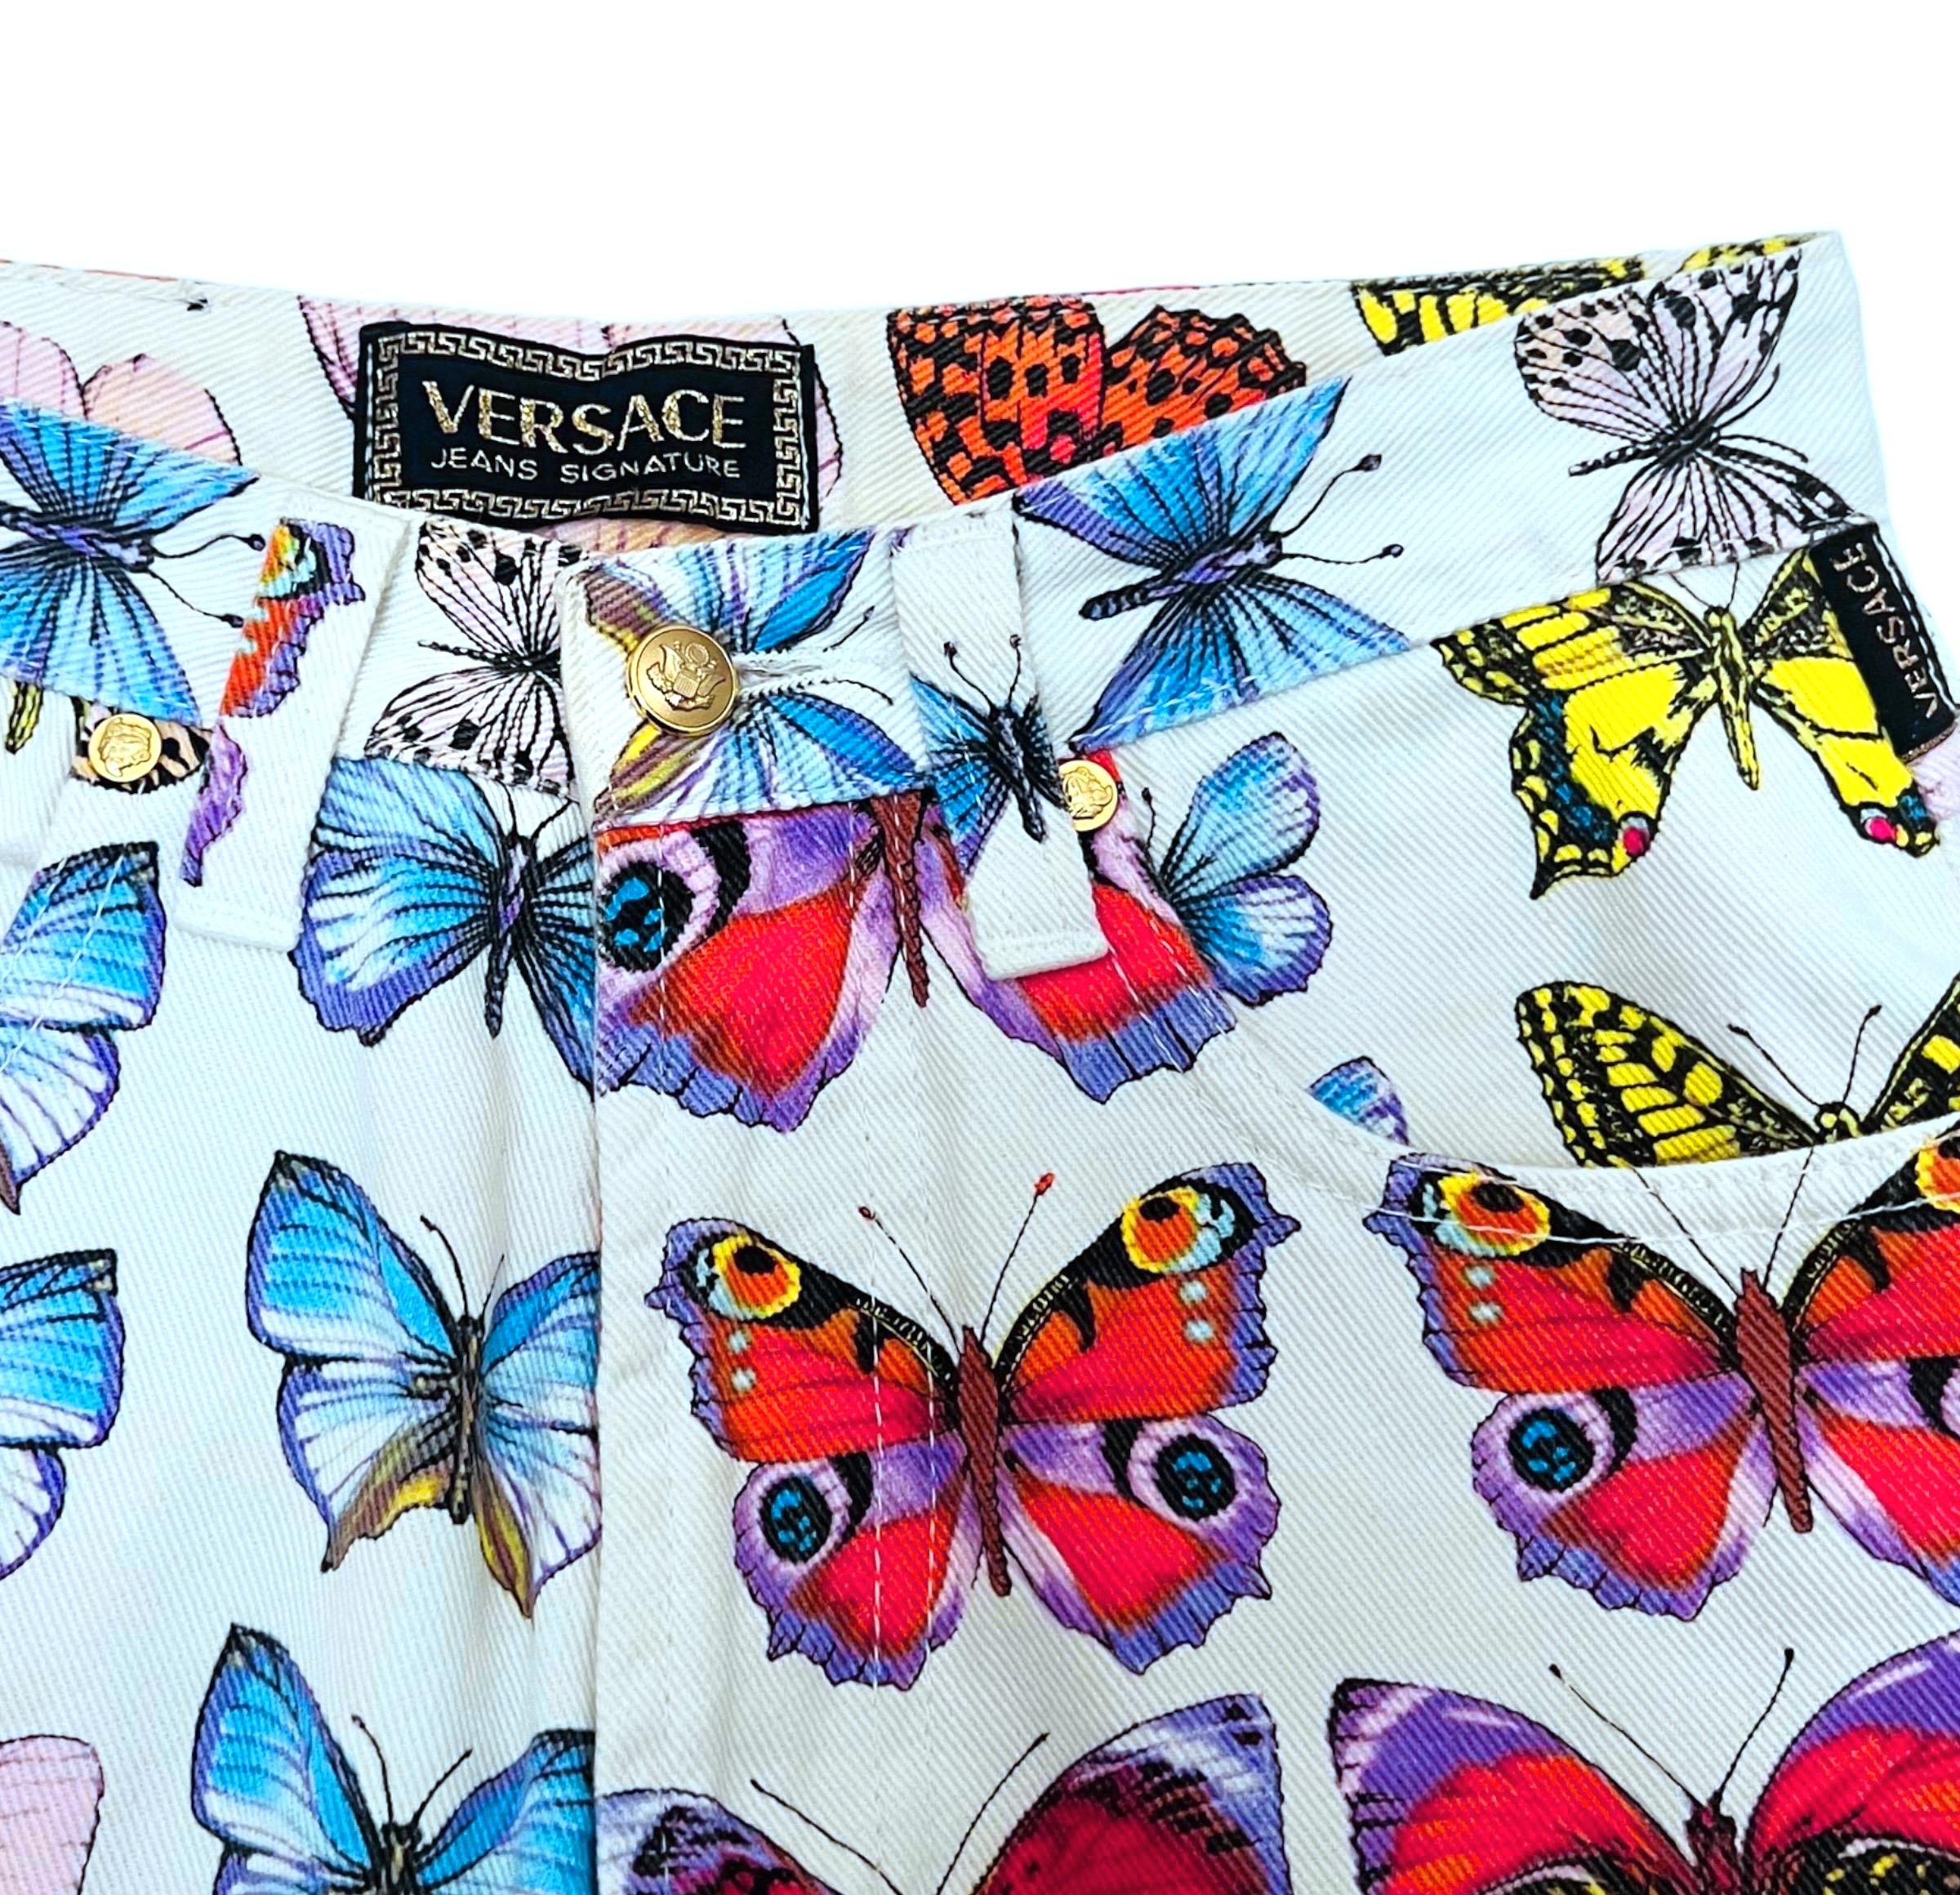 S/S 1995 Gianni Versace Butterfly Jeans For Sale 1